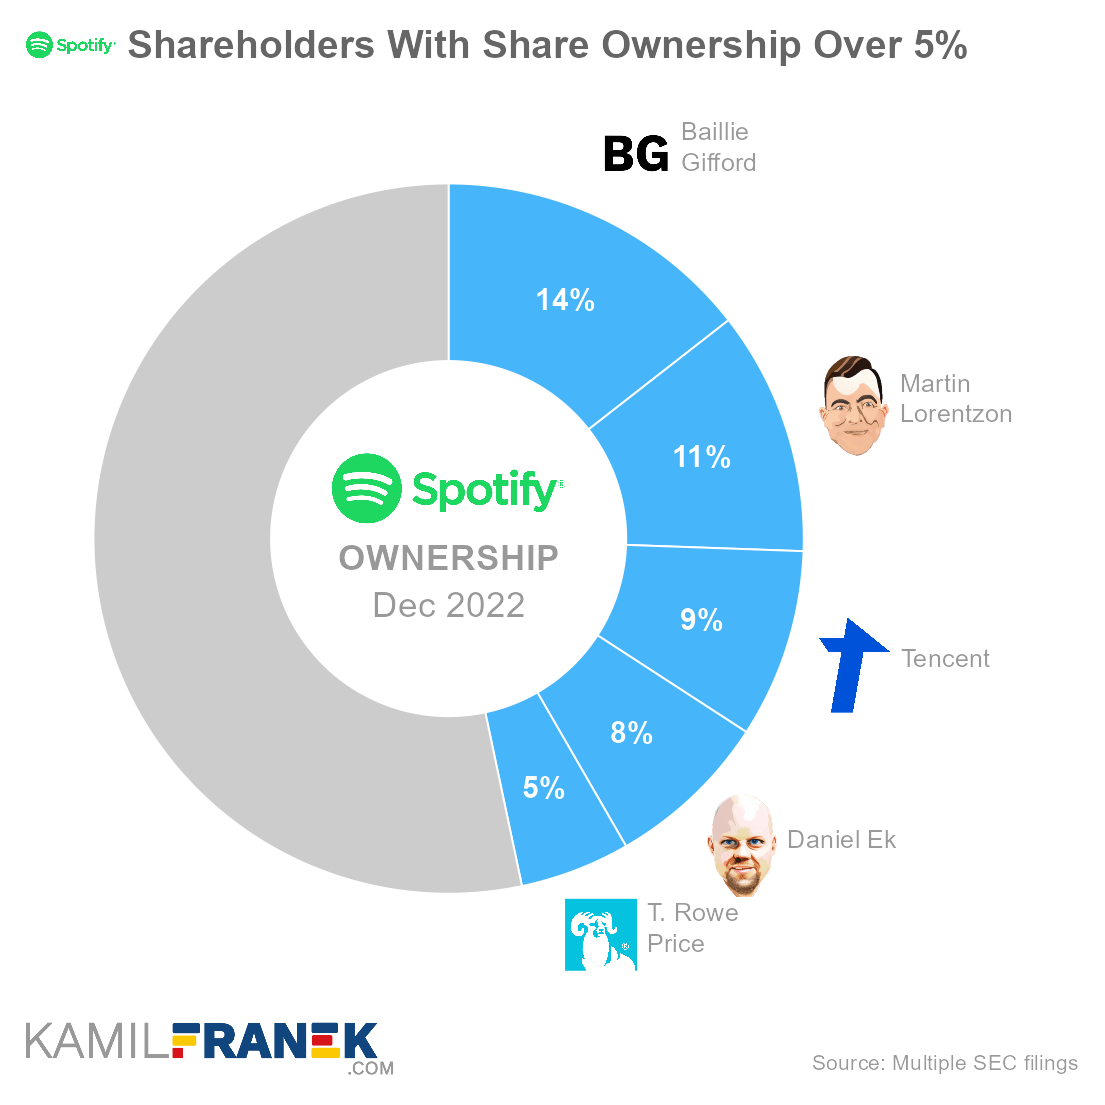 Spotify largest shareholders by share ownership and vote control (donut chart)